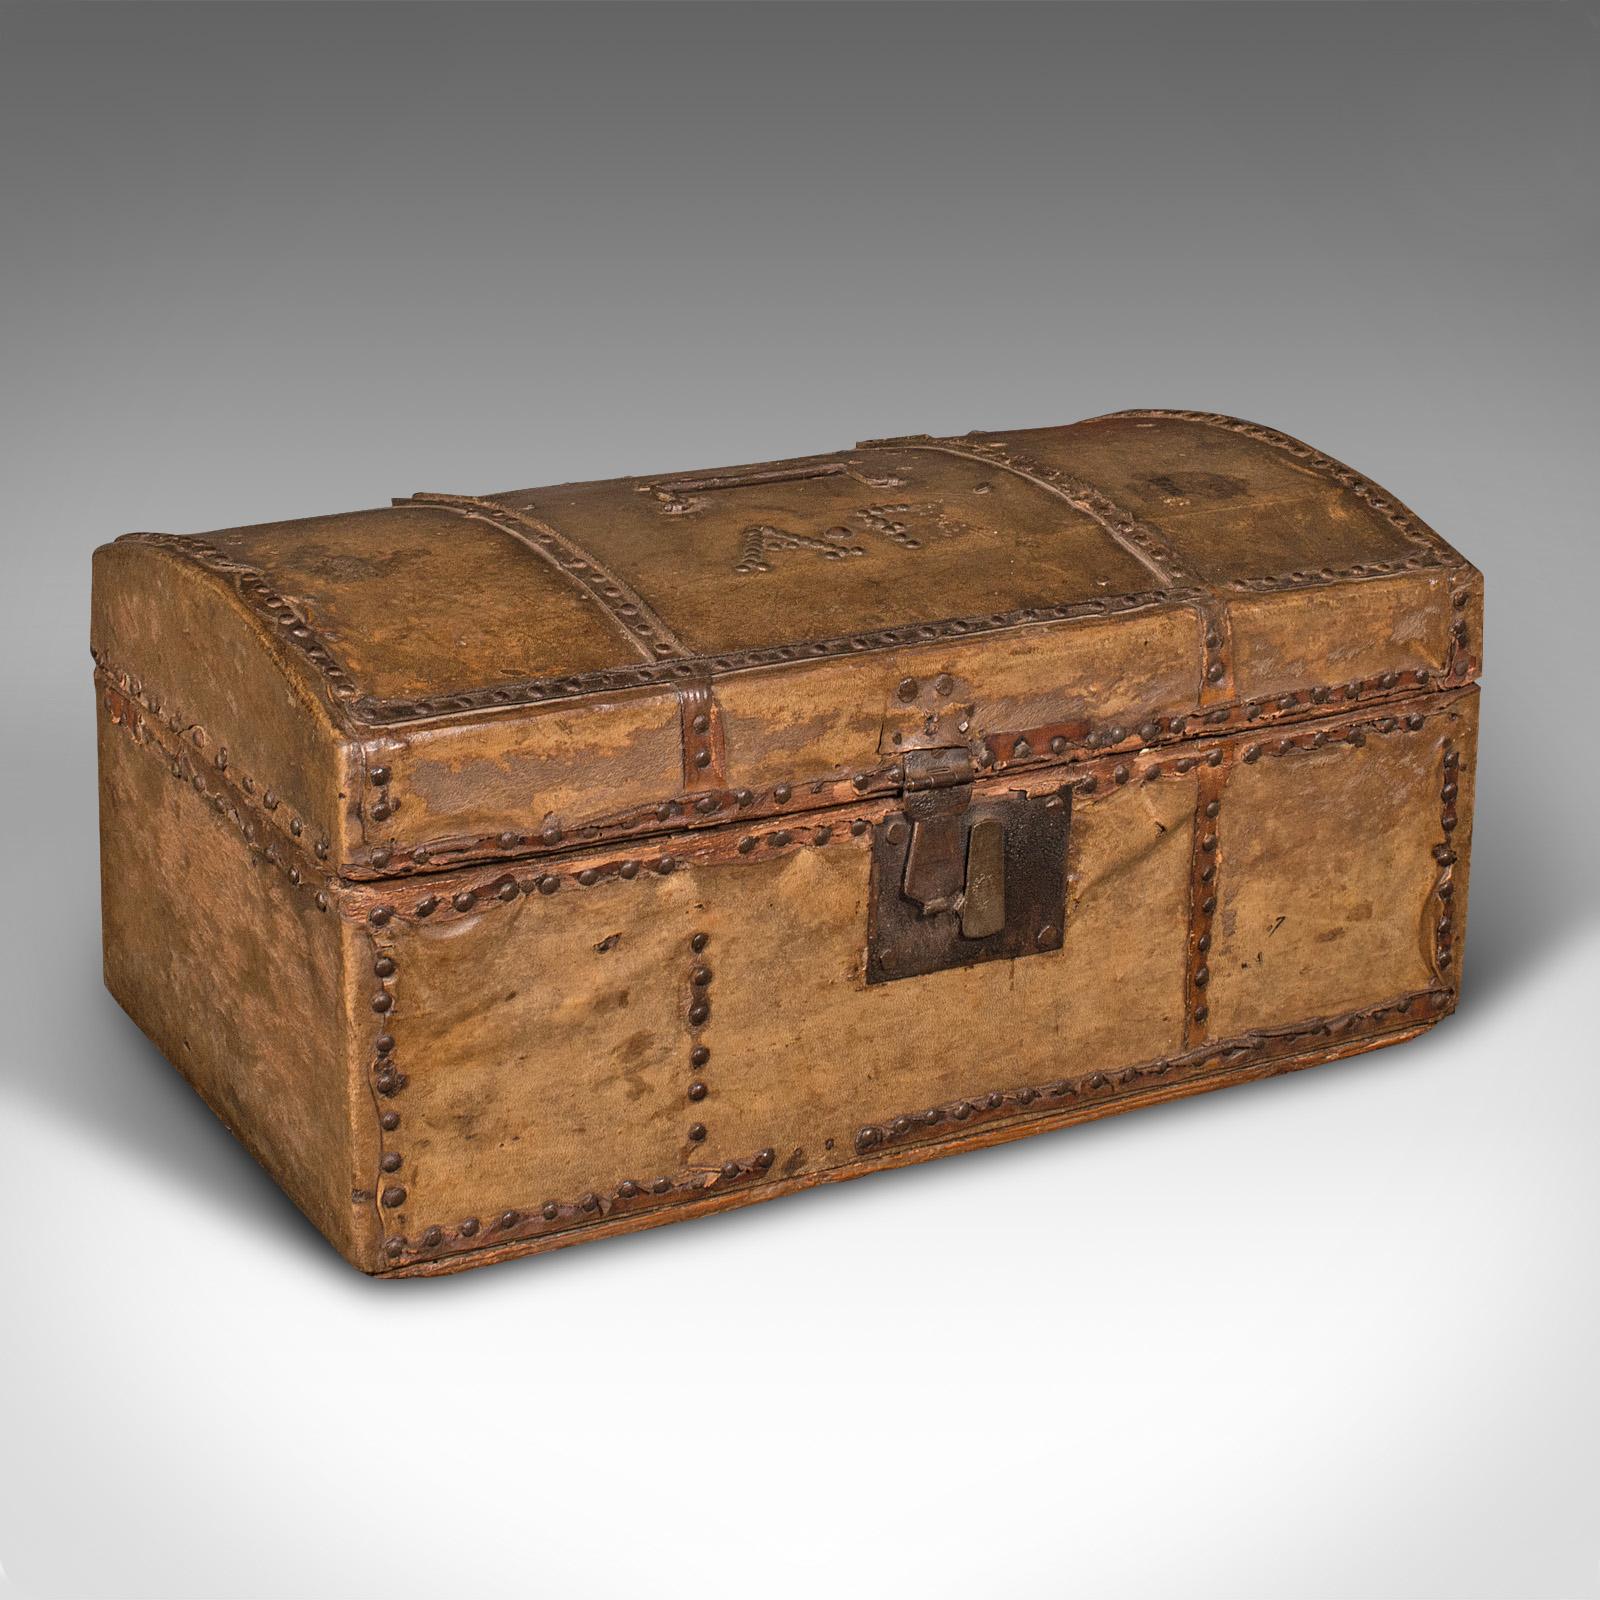 This is a small antique dome-top chest. A Spanish, leather covered decorative trunk, dating to the mid-Georgian period, circa 1750.

Fascinating weathered appearance to this Georgian decorative chest
Displays a desirable aged patina